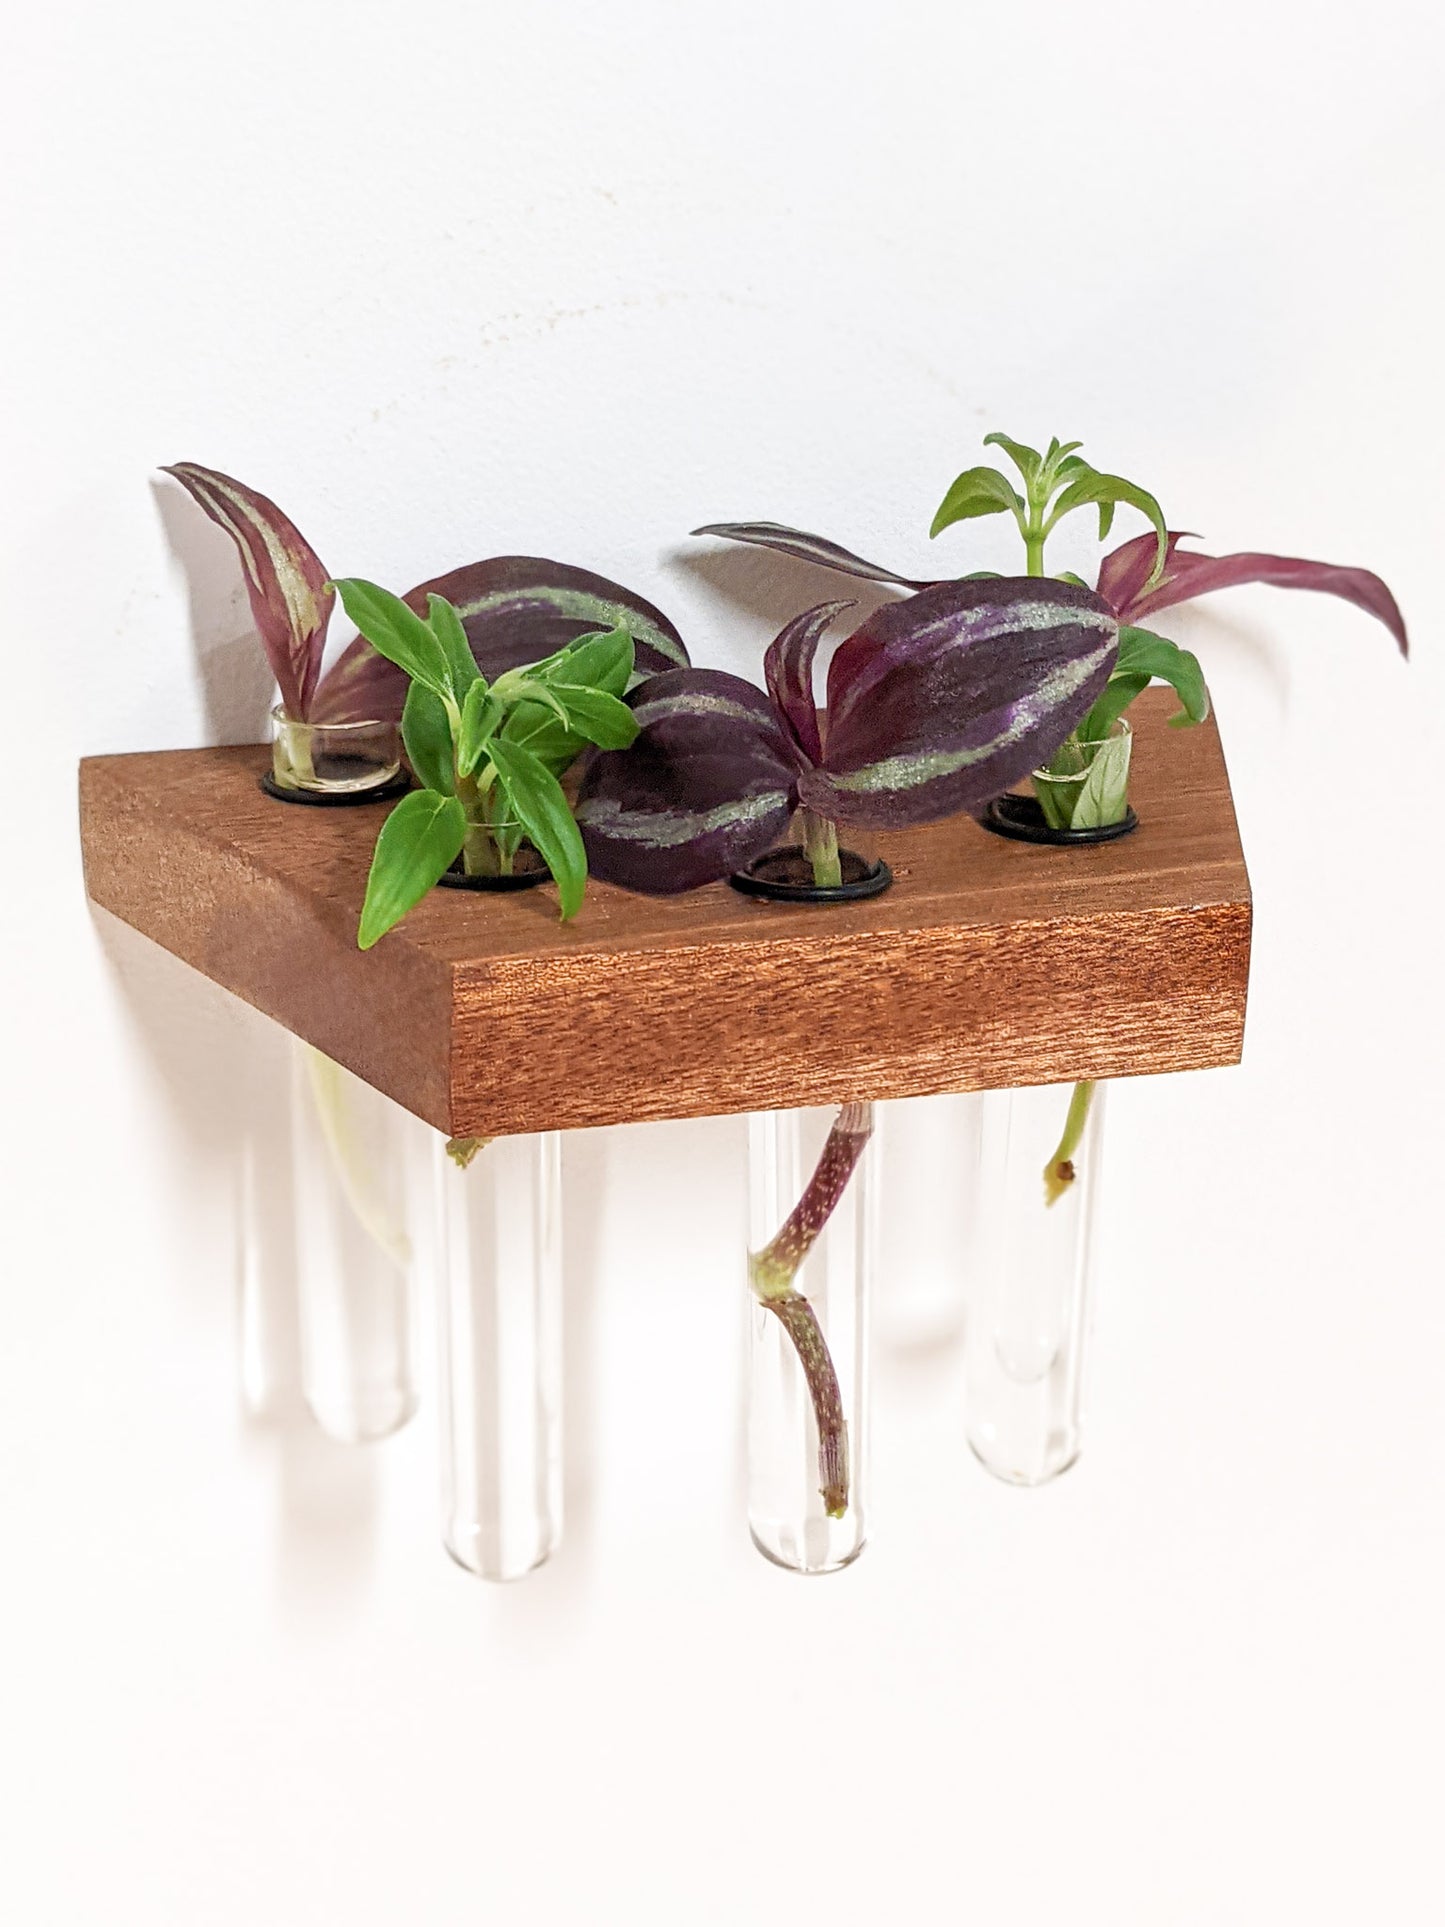 A head-on view of the mahogany trapezoid propagation shelf. The mahogany is smooth and dark brown with crisp sides. 4 glass test tubes are filled with green and purple cuttings.